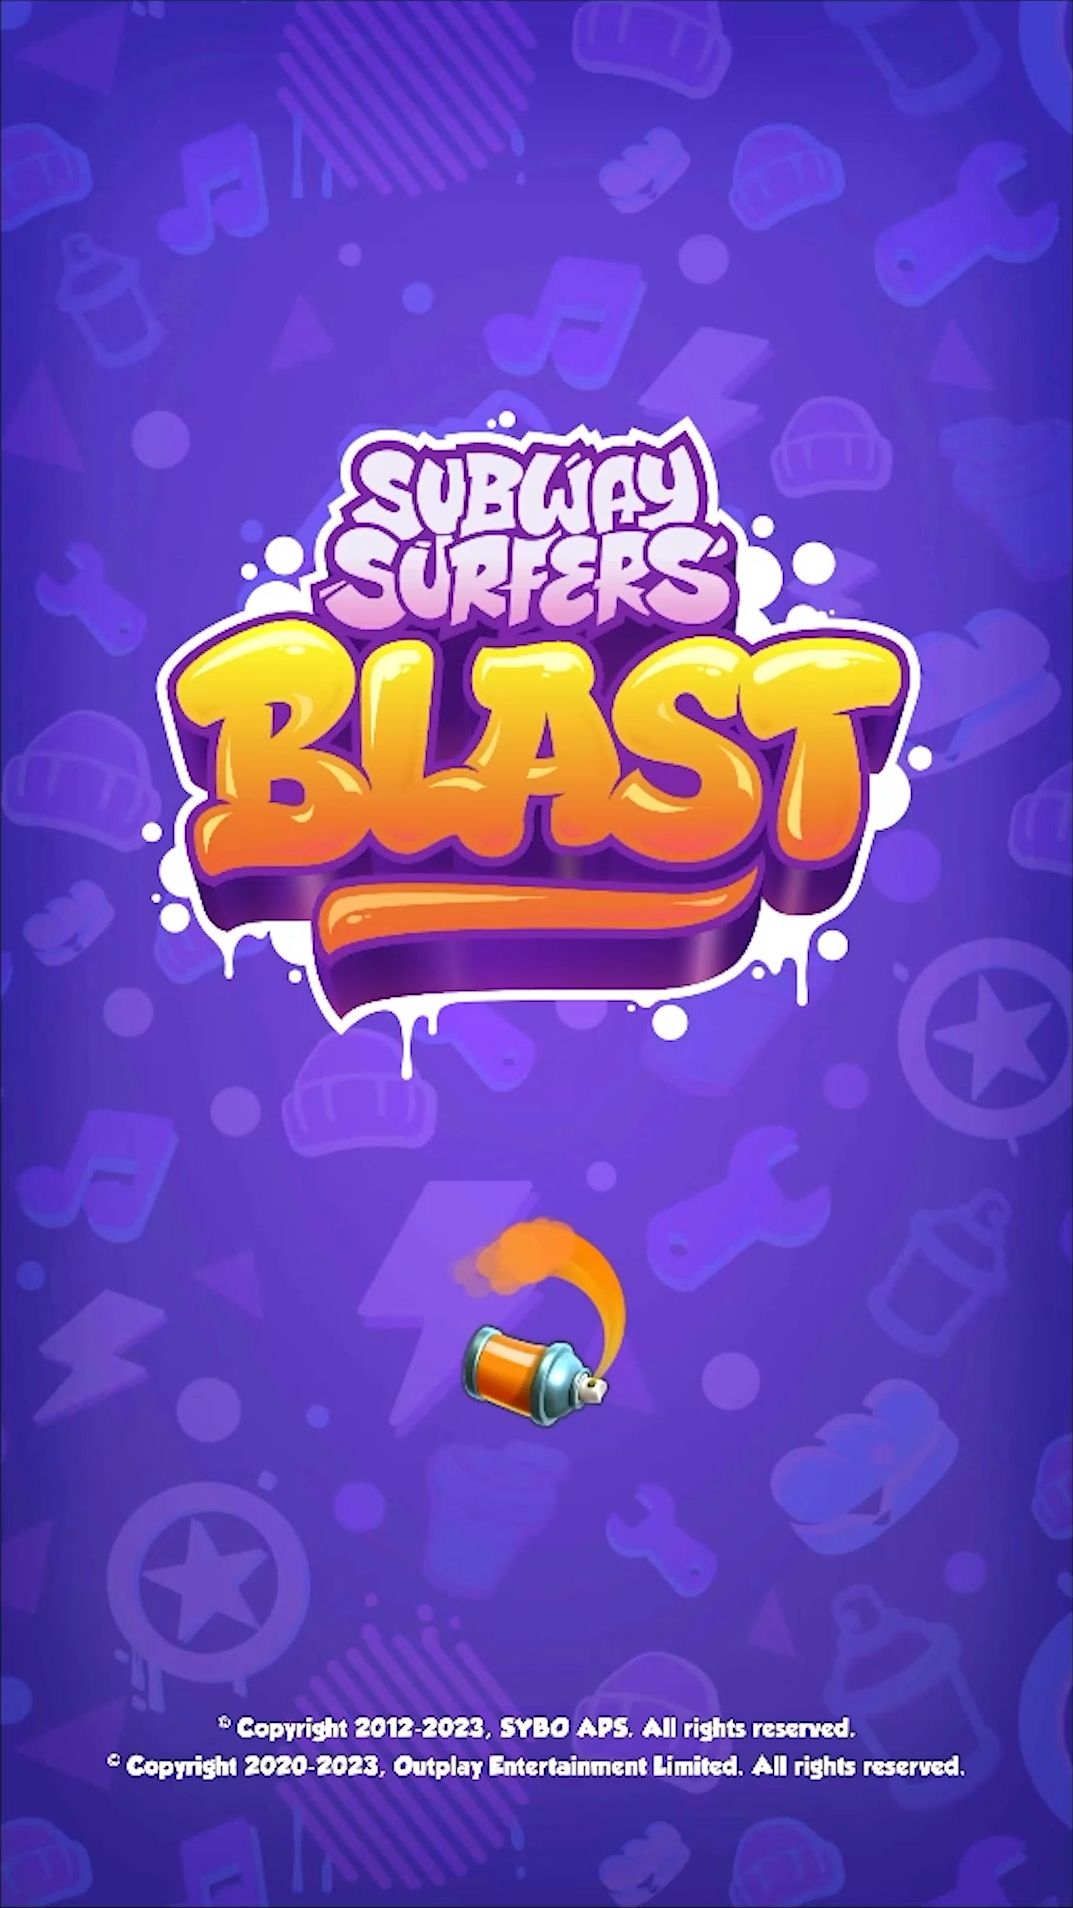 Subway Surfers Blast - New is Cool Game Level 31 - 35 iOS, Android 